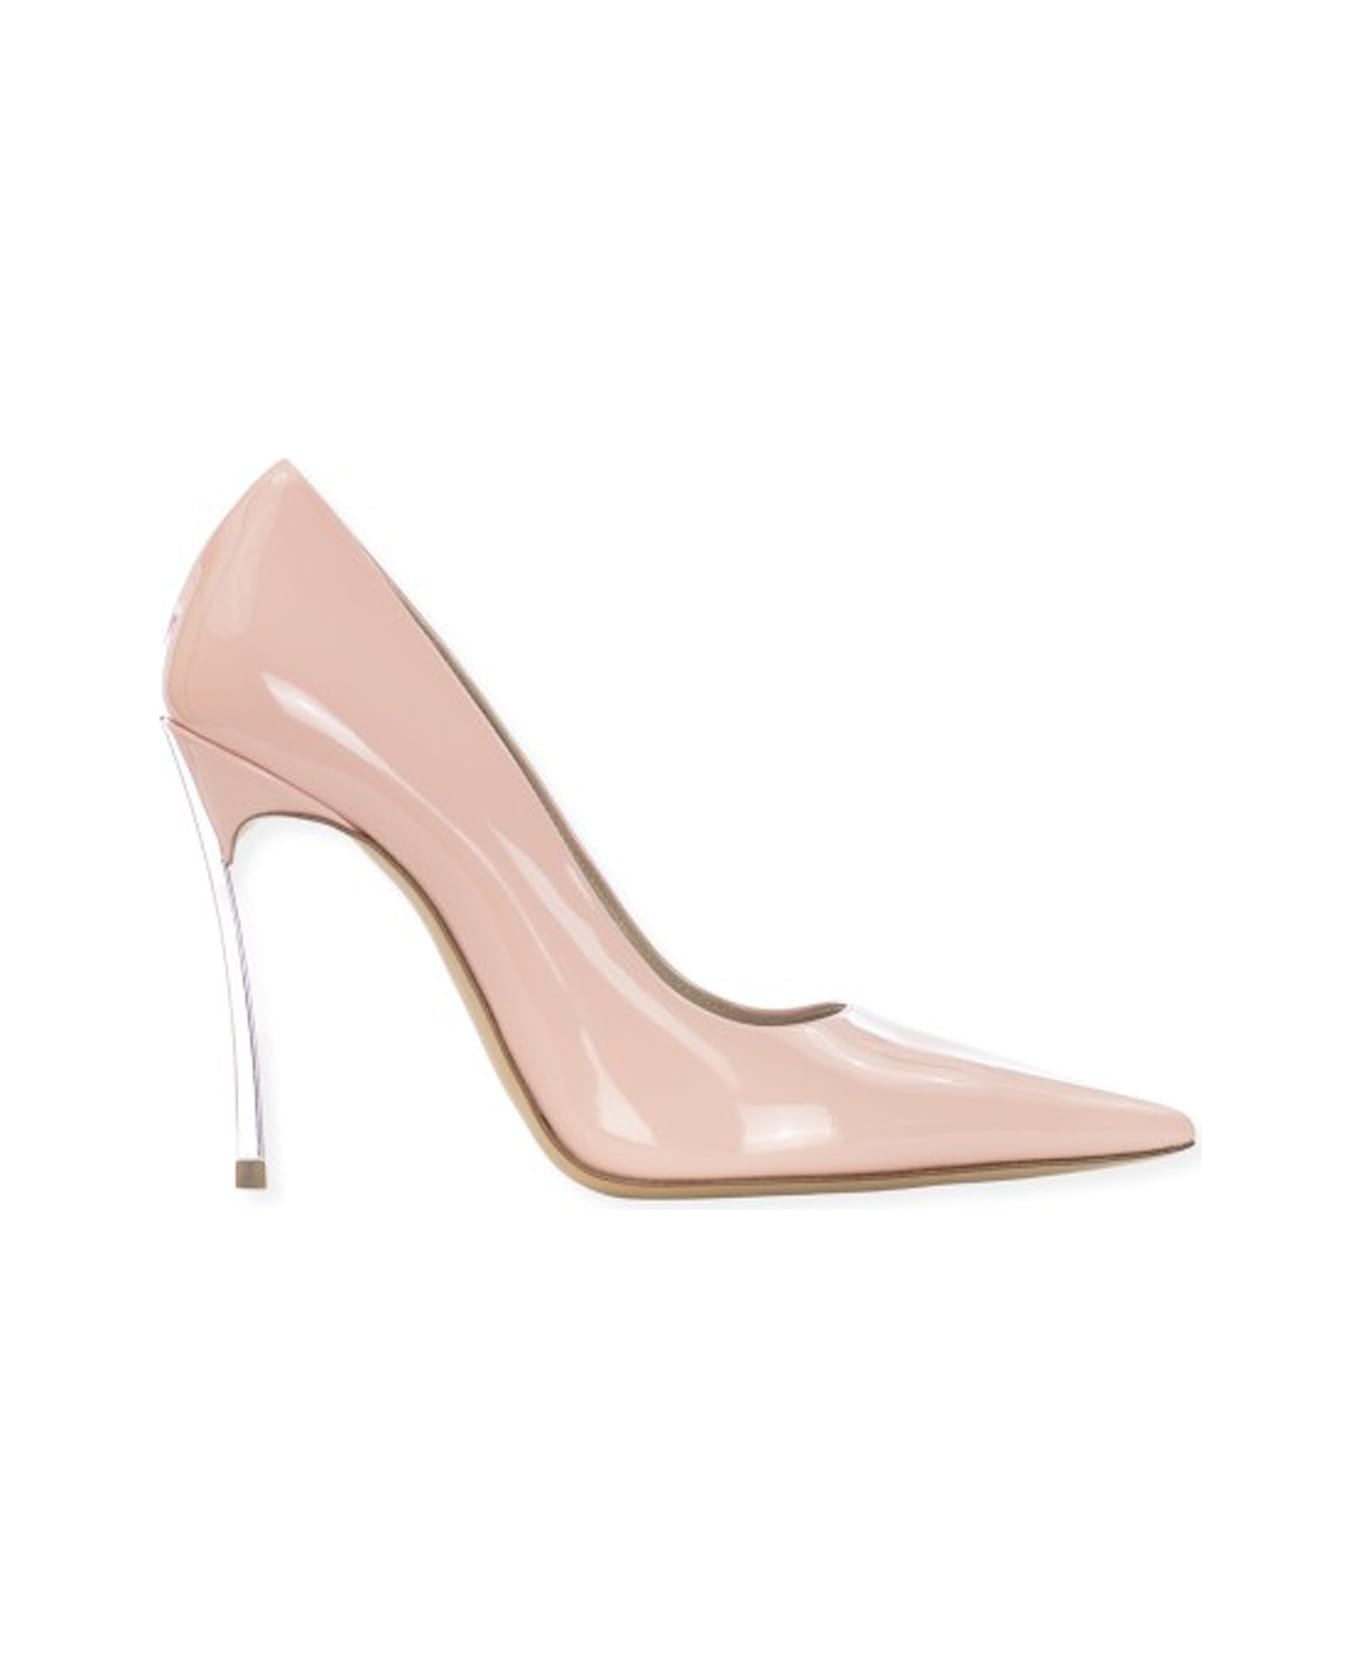 Casadei Shoes With Heels - Pink